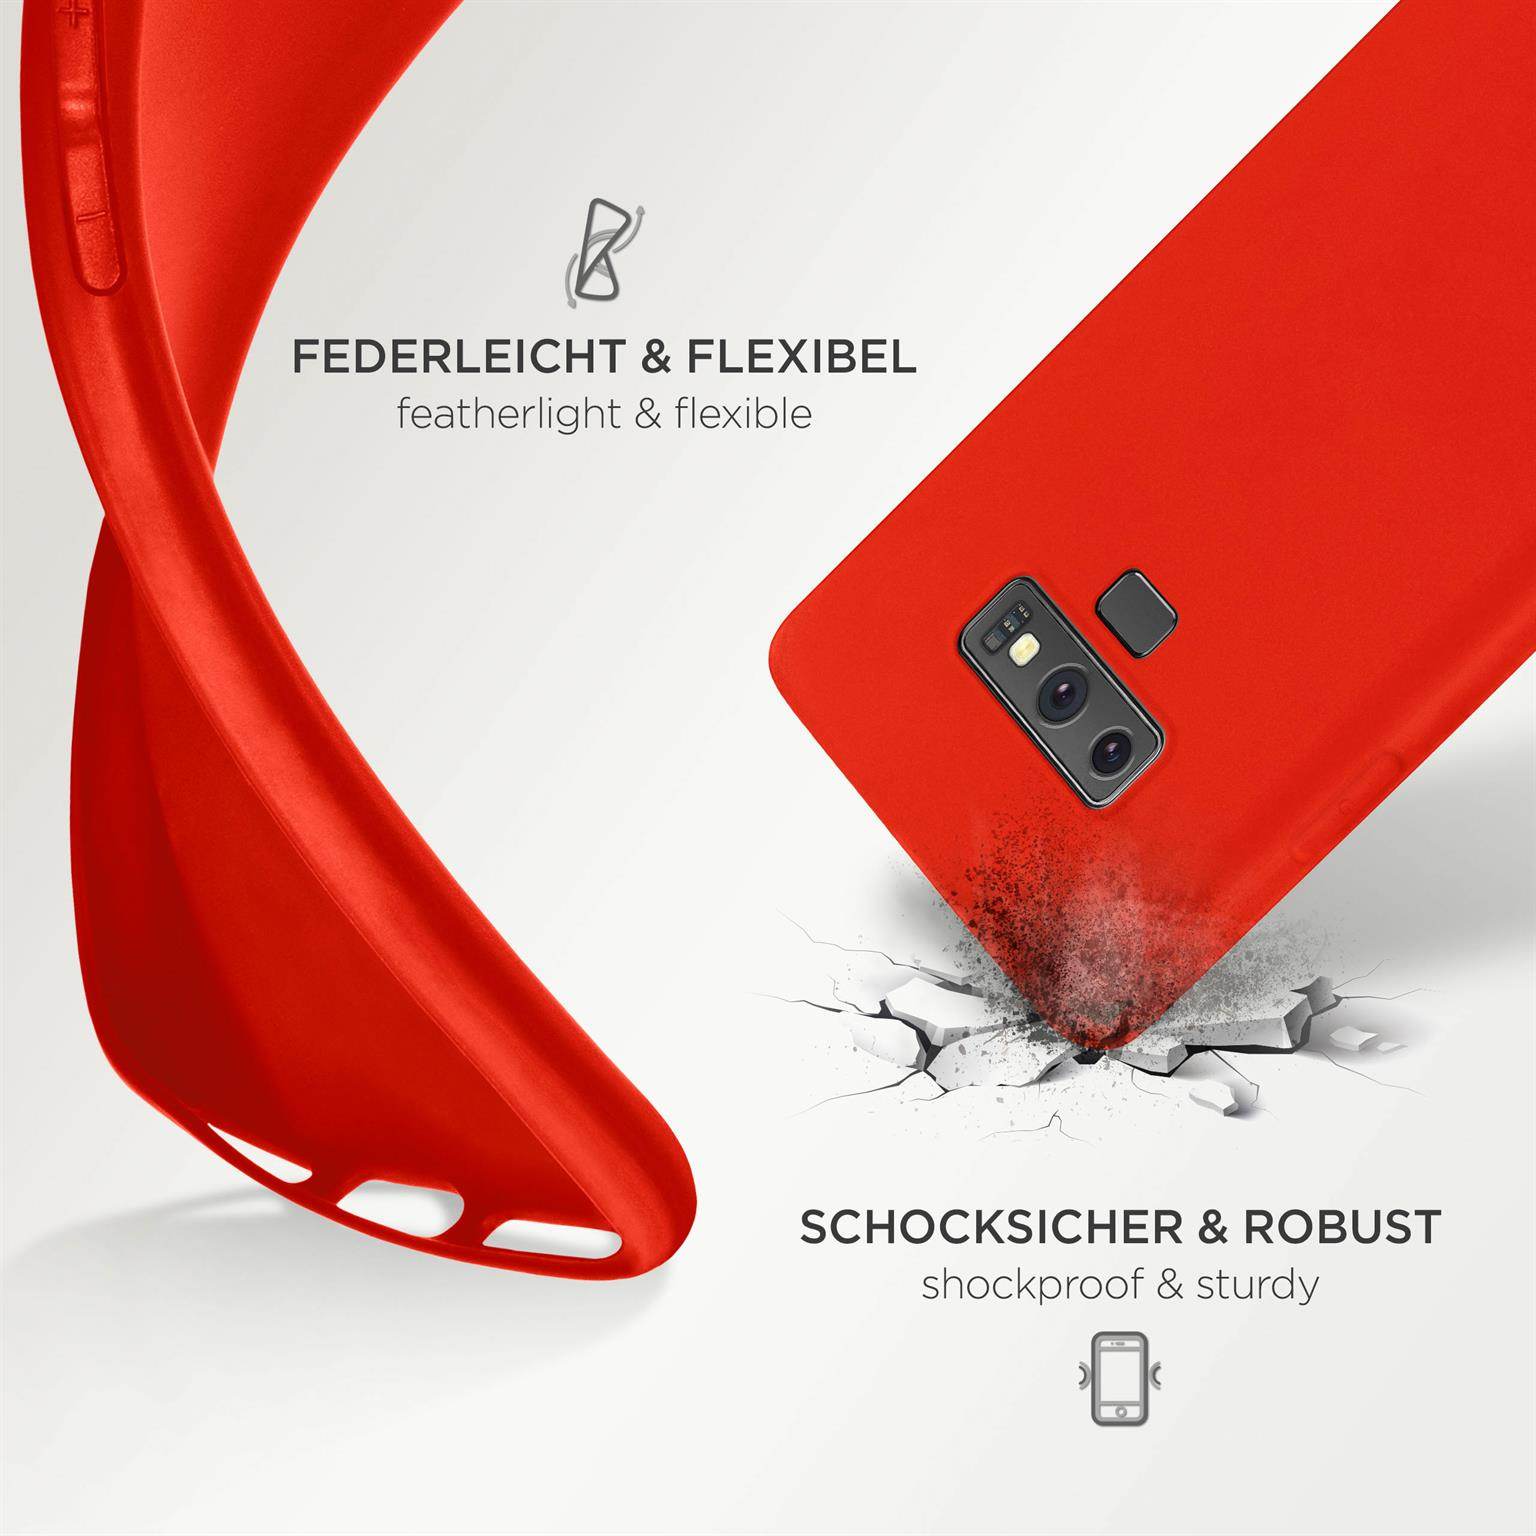 ONEFLOW SlimShield Backcover, Pro Case, Galaxy Note Samsung, Rot 9